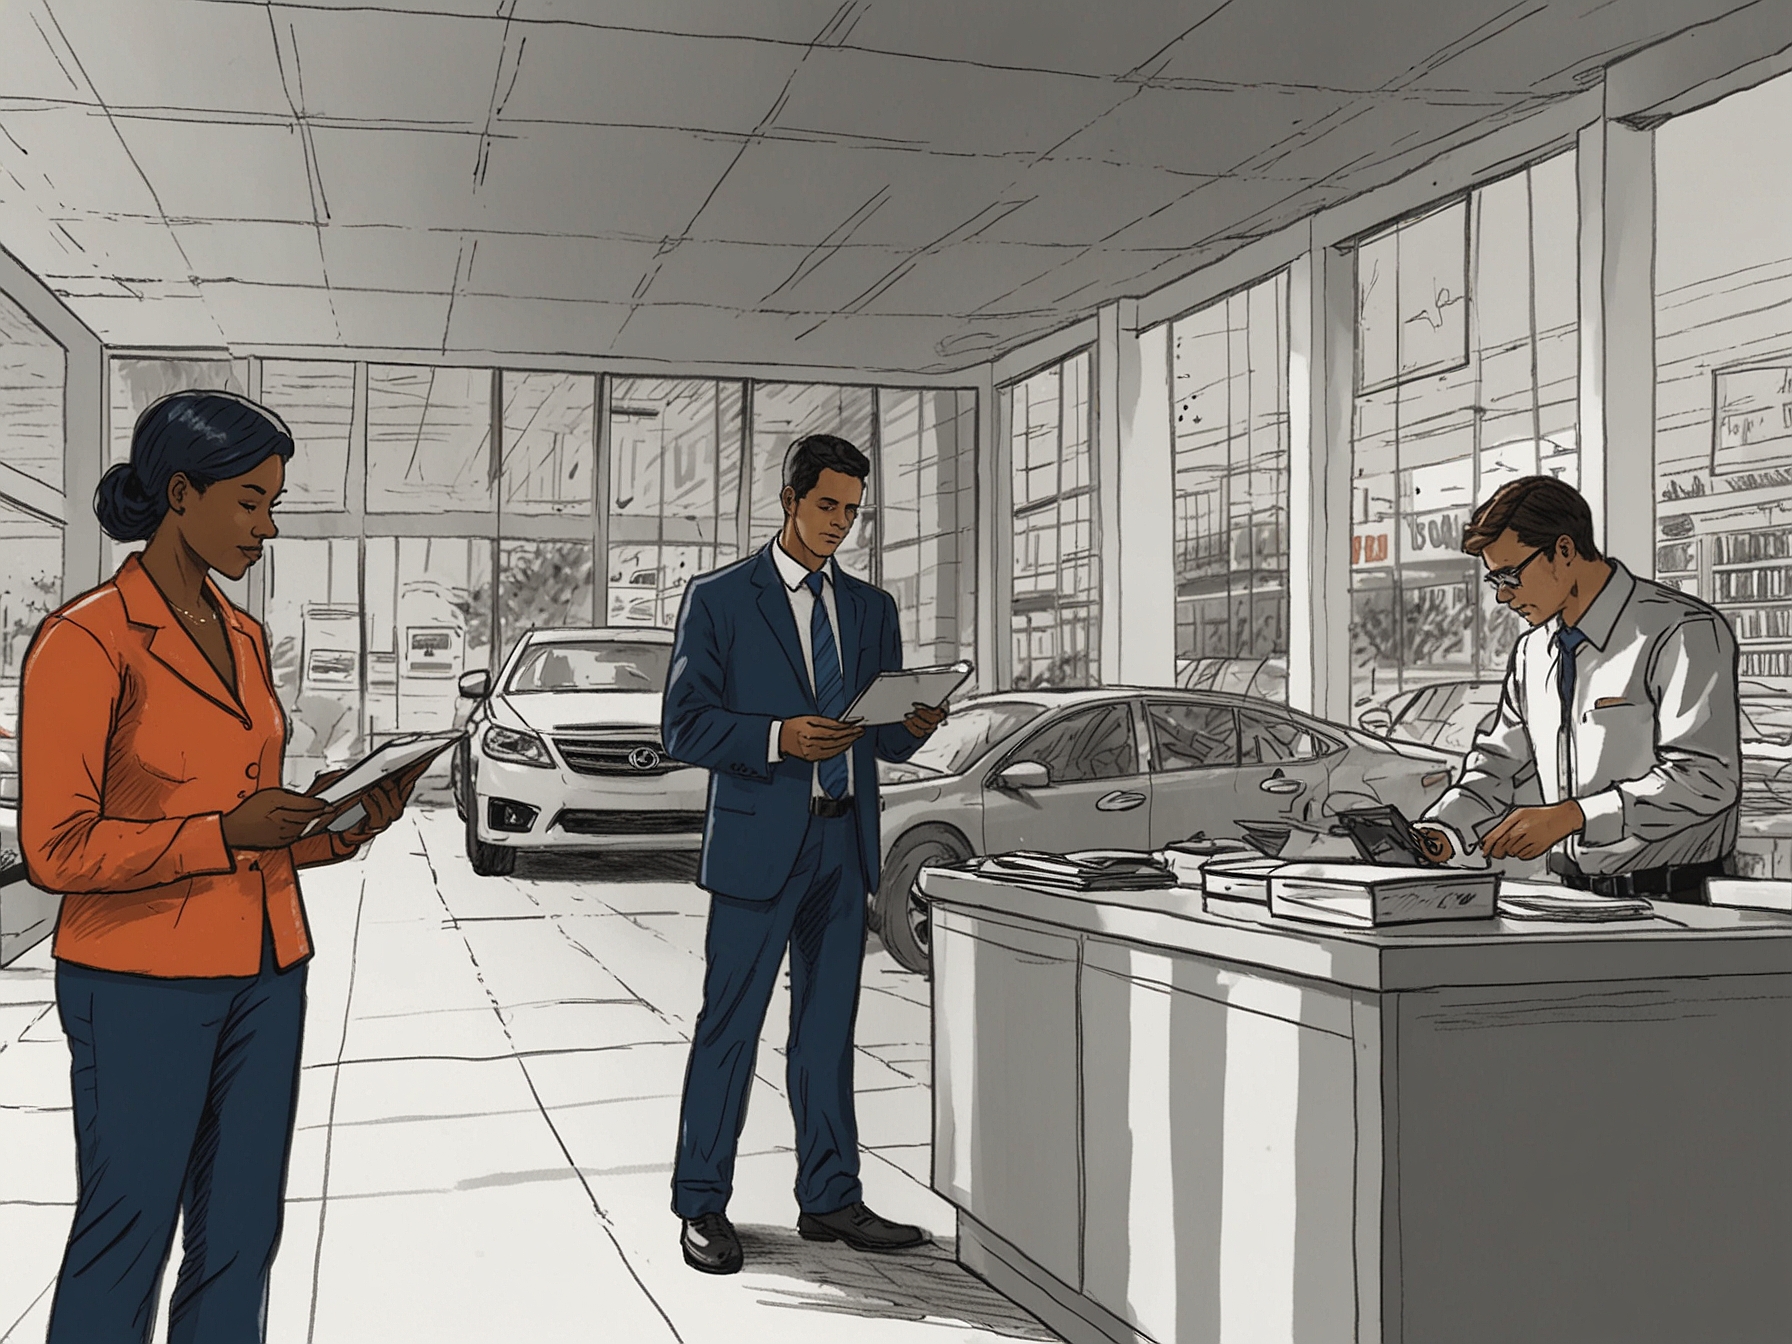 Car dealership employees using pens and paper to complete transactions and manage inventory manually, showcasing the regression from digital to traditional methods due to the cyberattack.